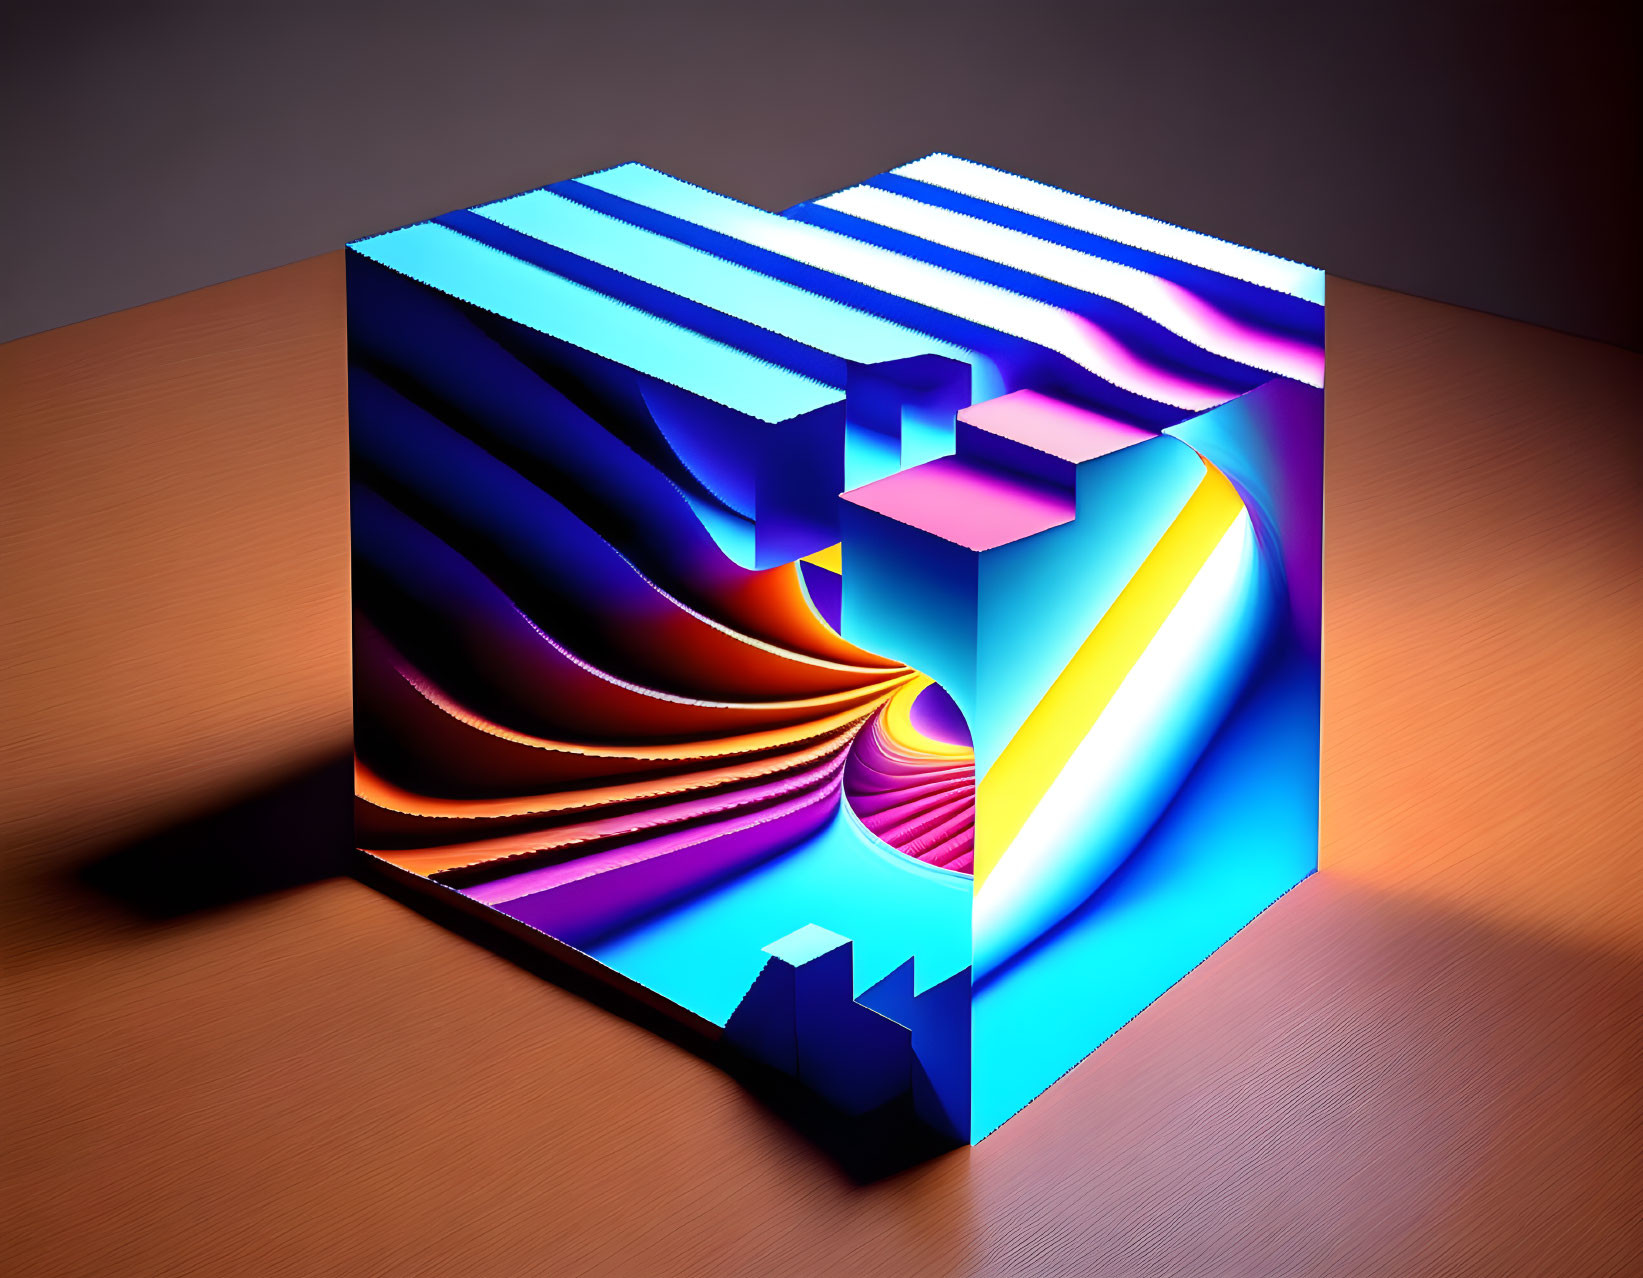 Colorful 3D cube with surreal landscape illusion on dark background